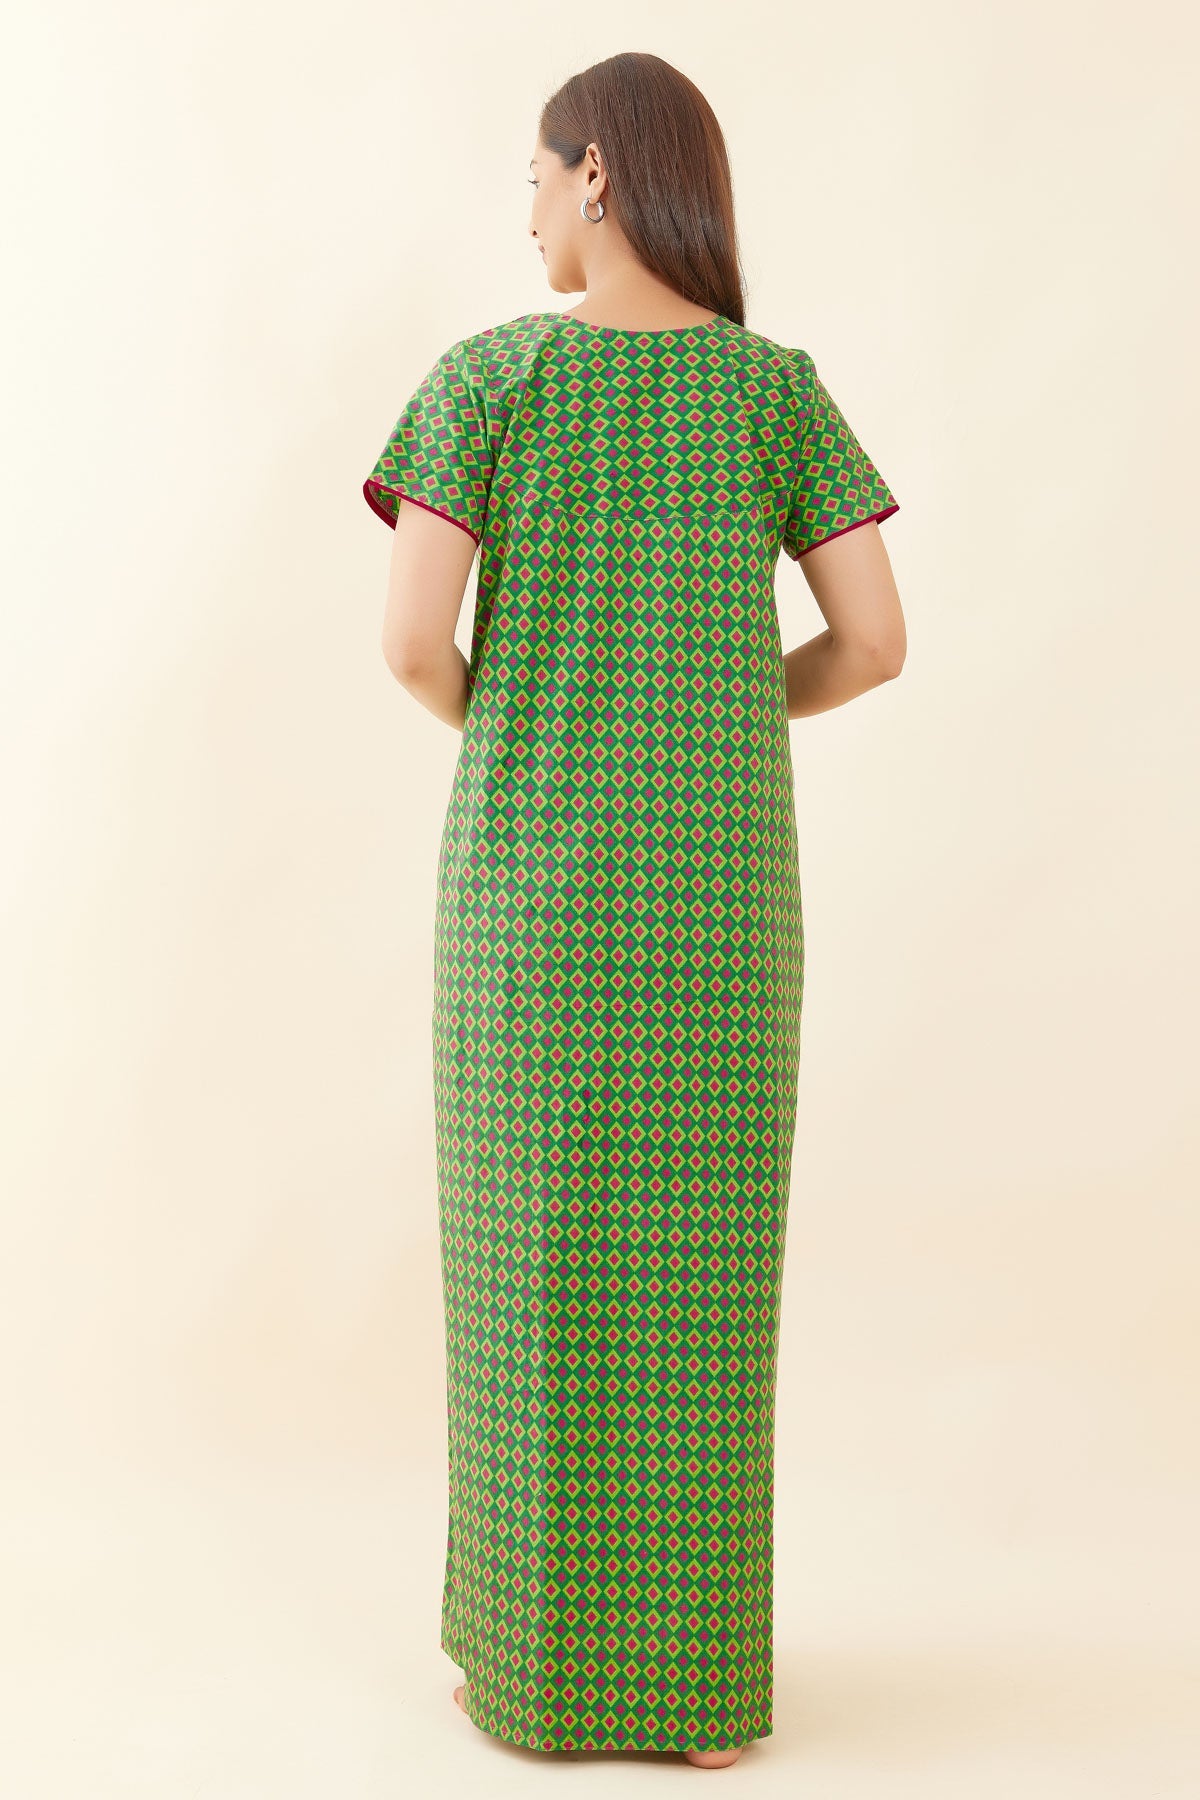 All Over Geometric Printed With Pleat Embellished Yoke Nighty - Green